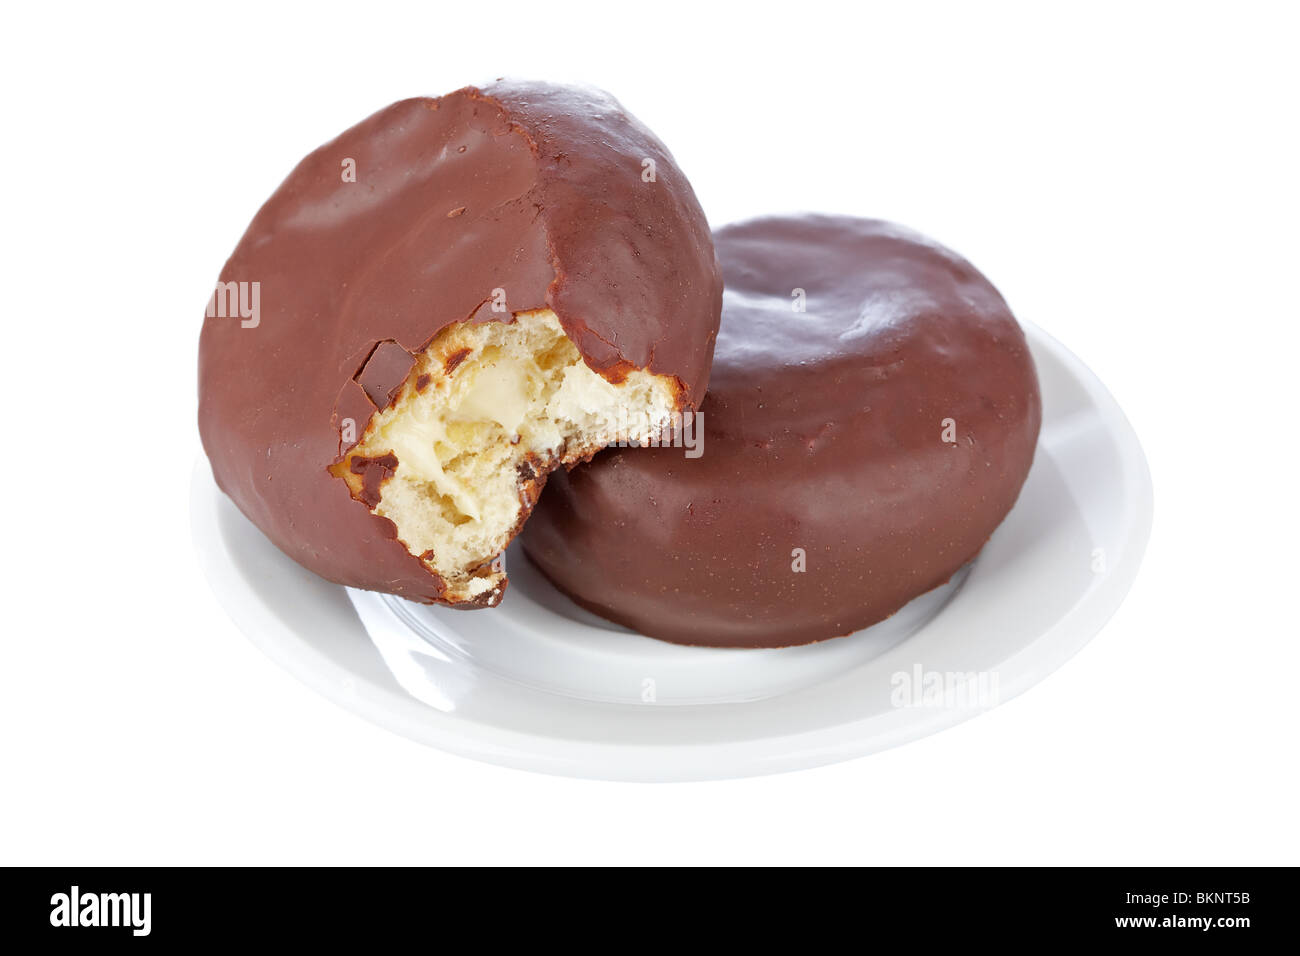 Two delicious chocolate donuts on a dish reflected on white background with shallow depth of field Stock Photo